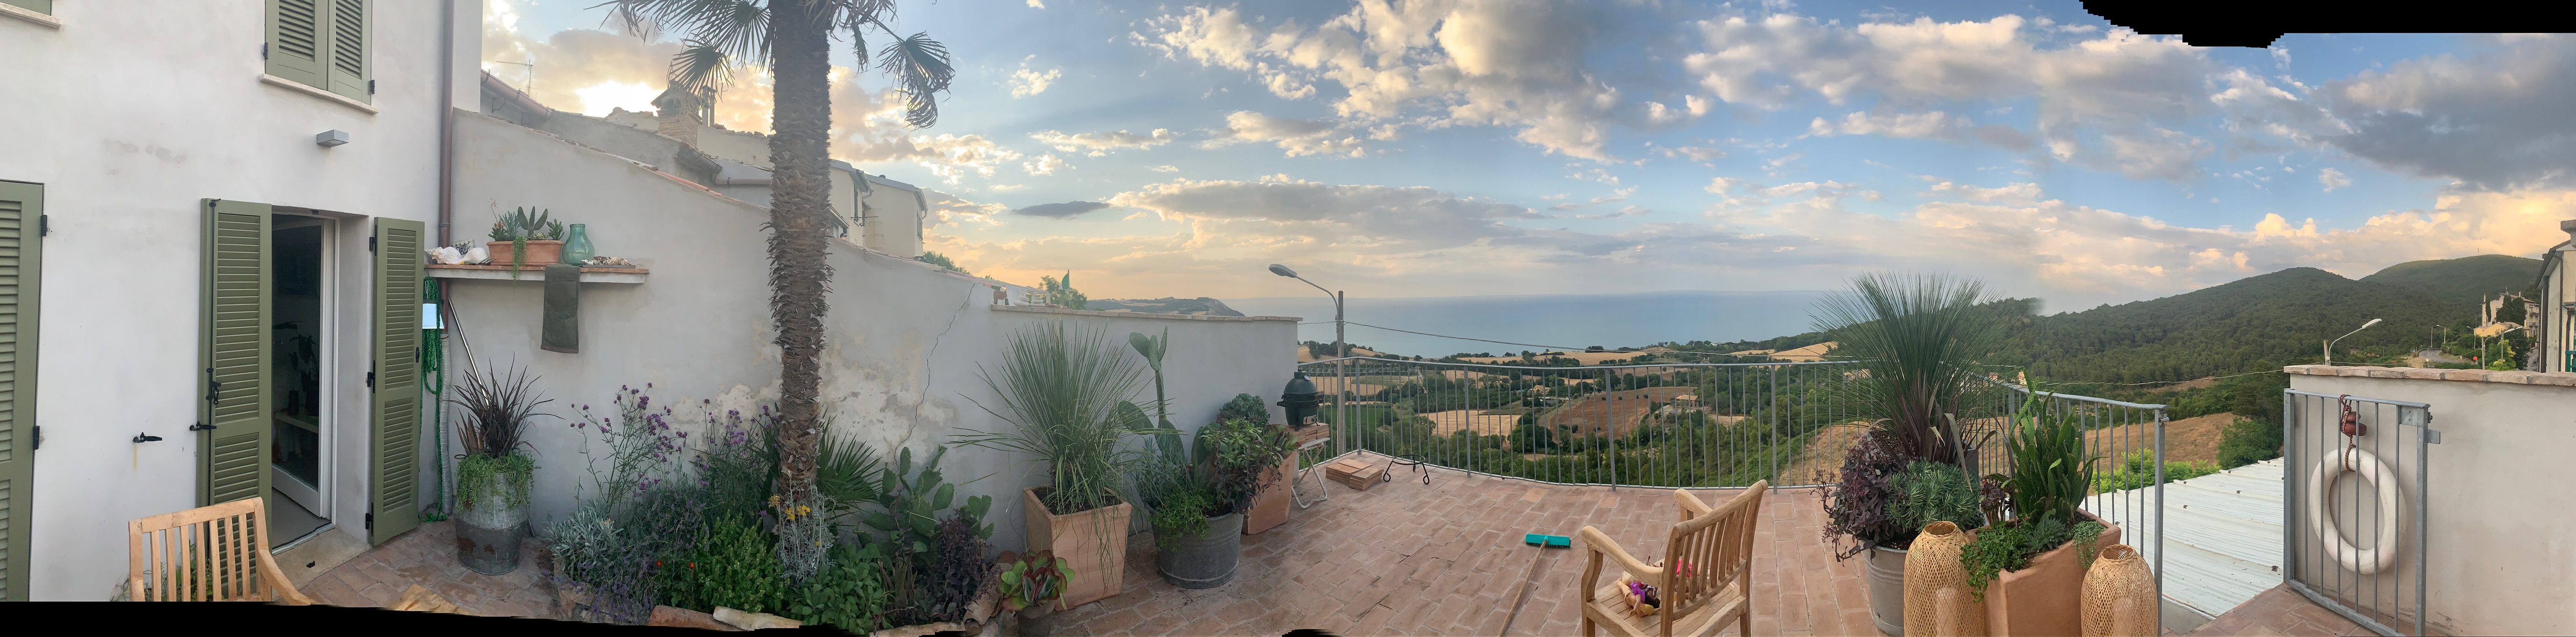 Panorama of the terrace